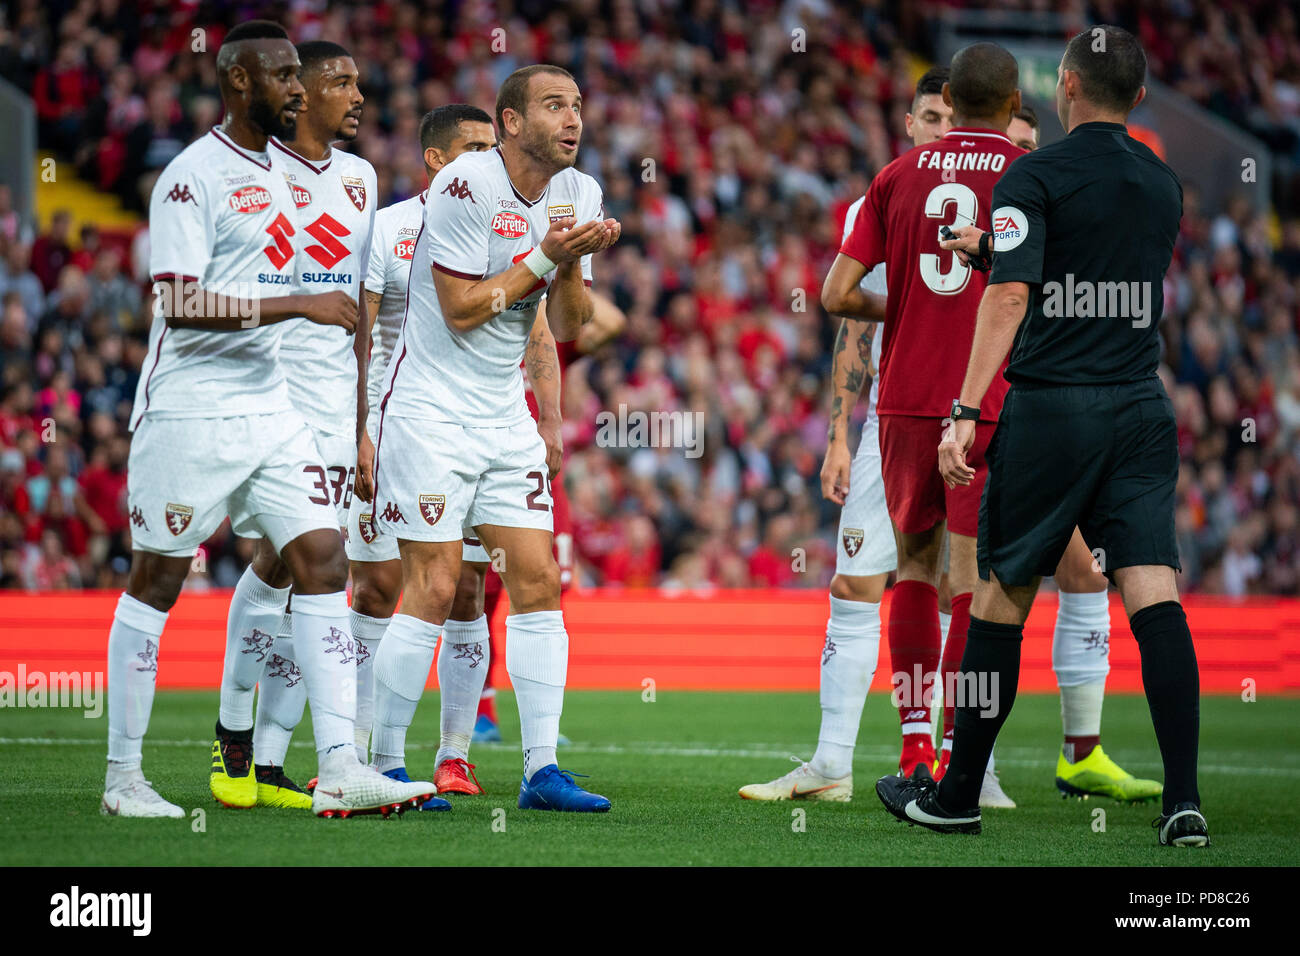 Liverpool, UK. 7th August 2018. Torino's Lorenzo De Silvestri remonstrates  with referee Michael Oliver 7h August